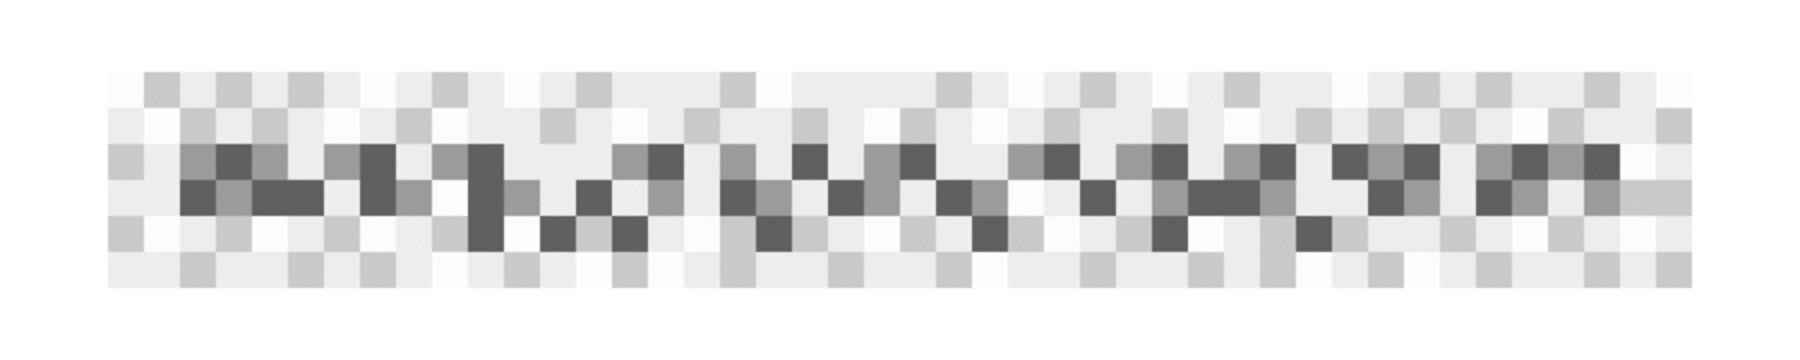 Censorship blur effect checkered texture. Monochrome gray pixel mosaic pattern to hide text, image or another unwanted or privacy content